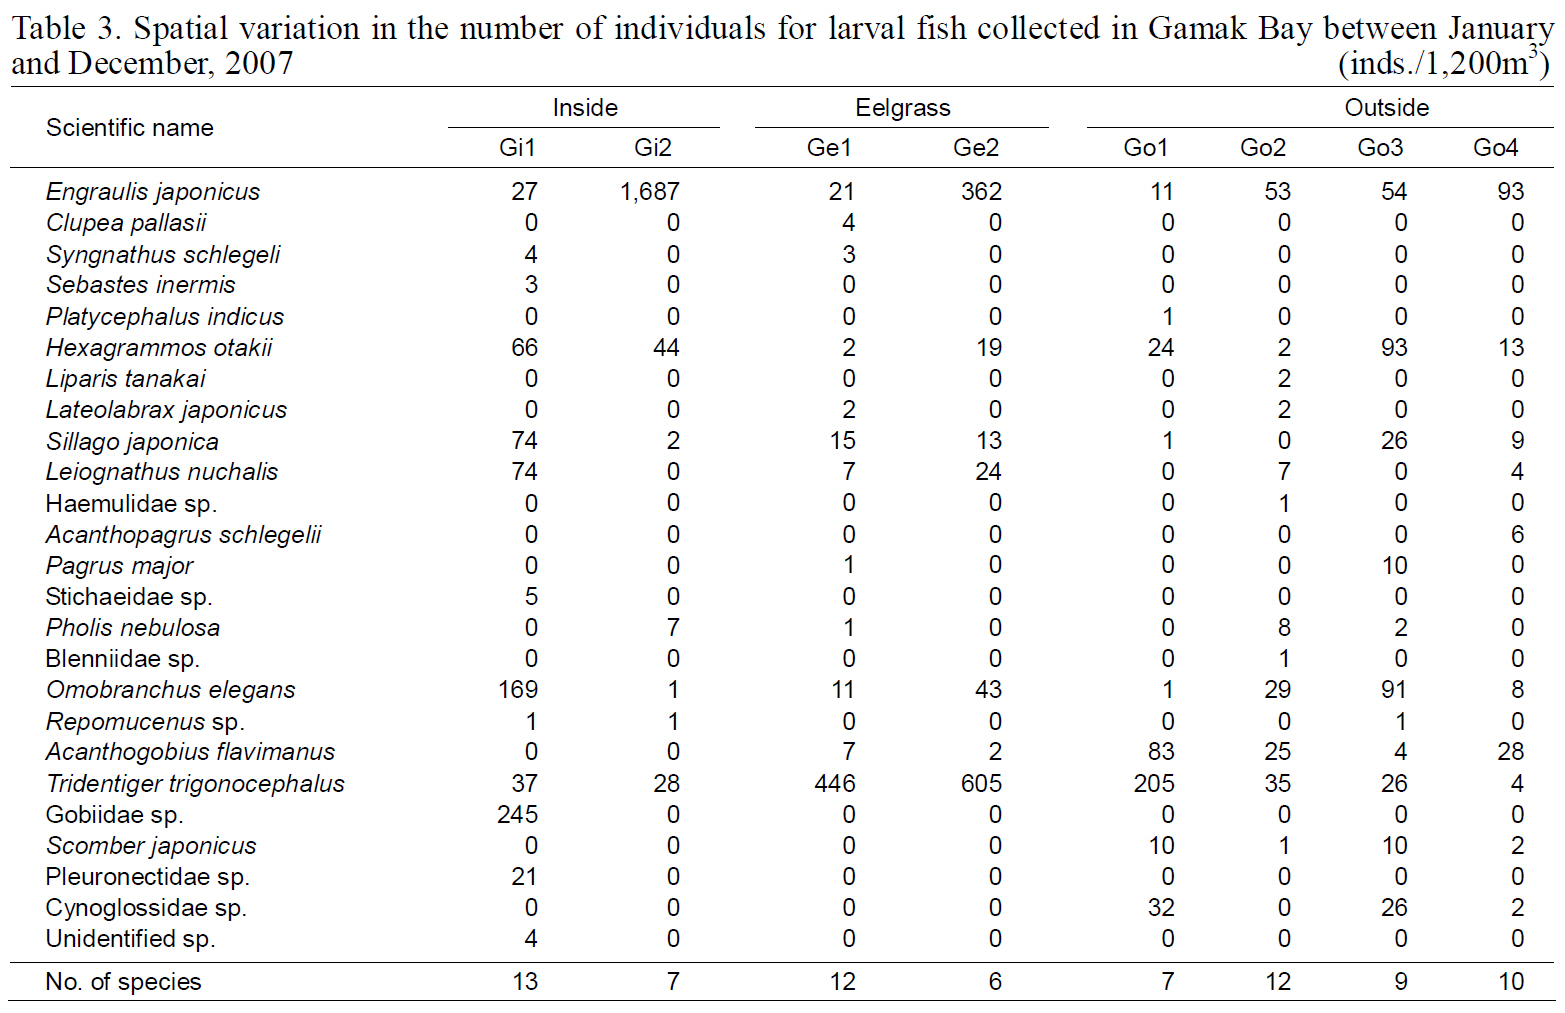 Spatial variation in the number of individuals for larval fish collected in Gamak Bay between January and December 2007